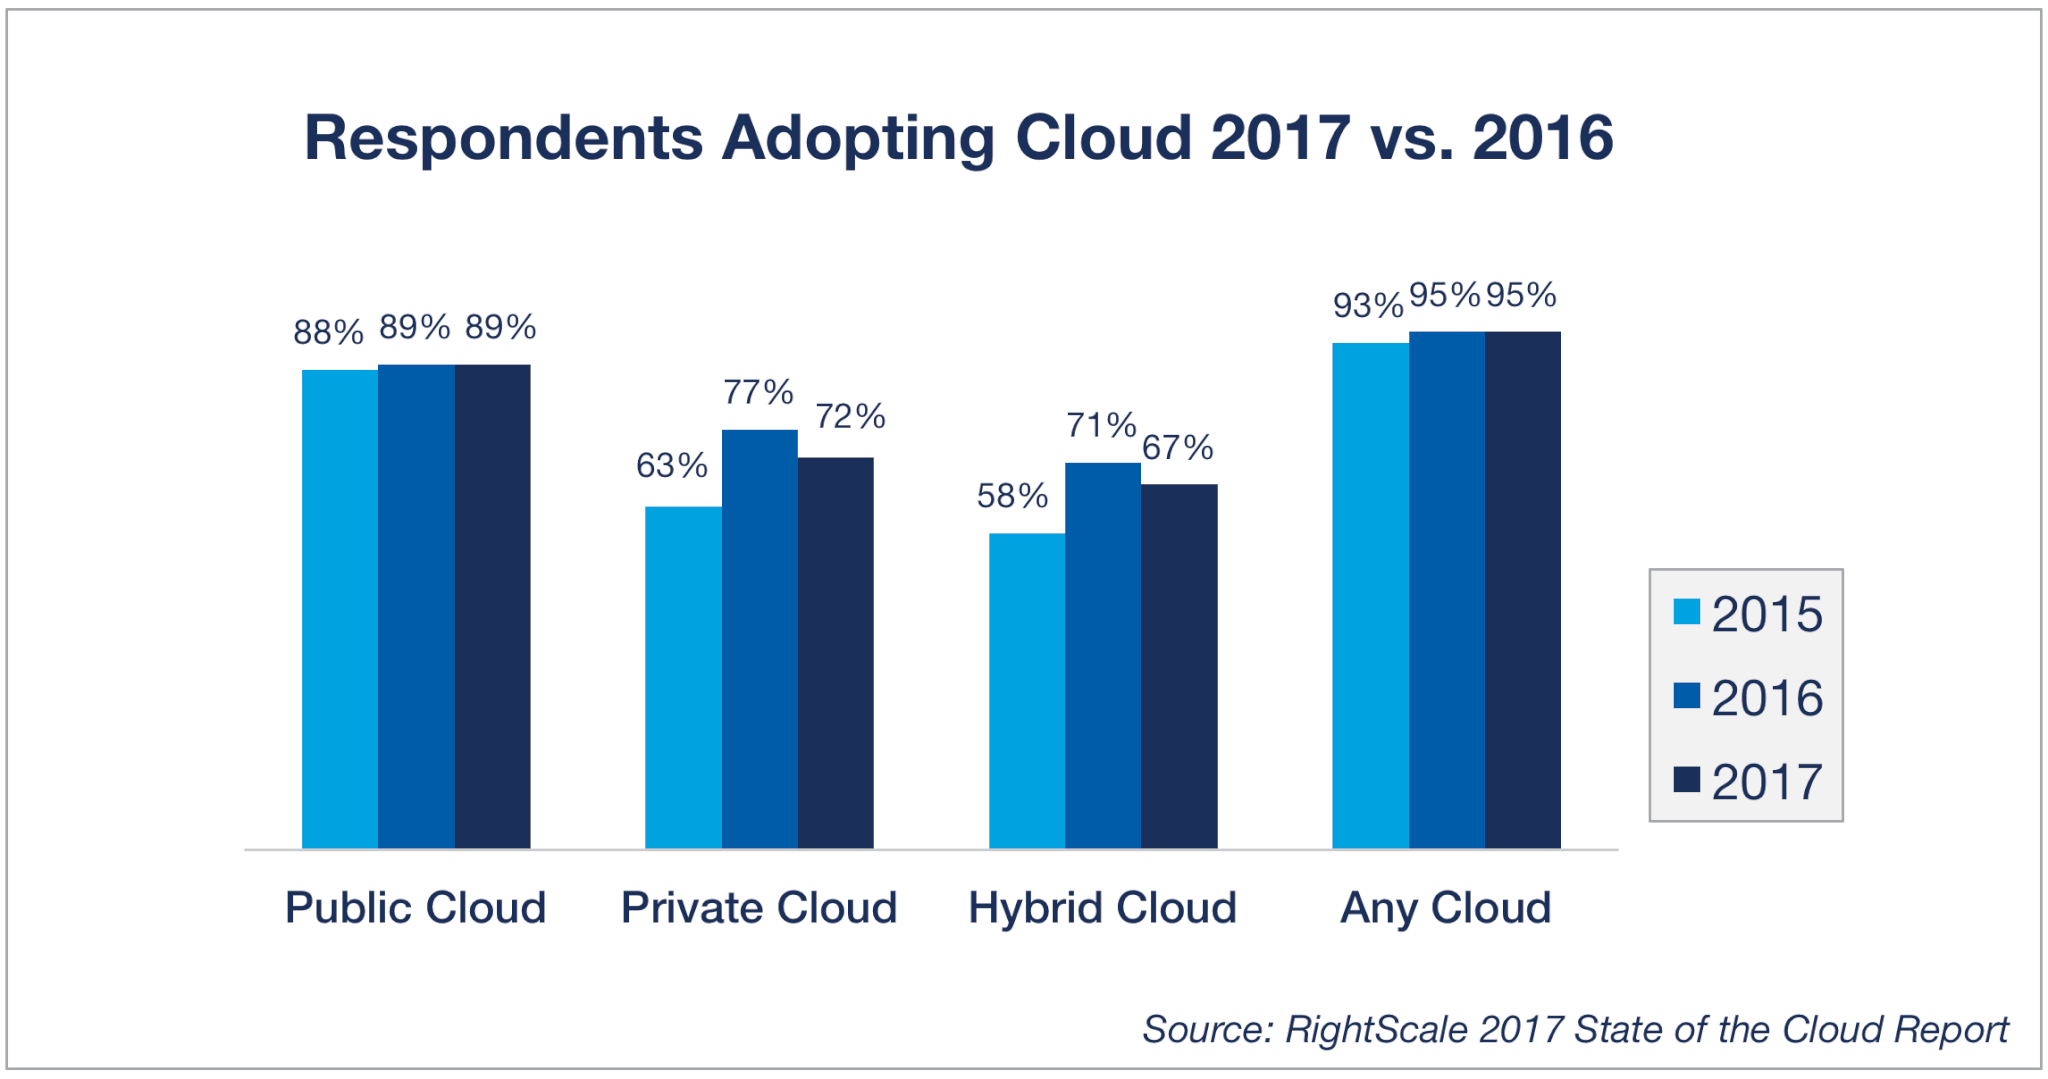 RightScale 2017 State of the Cloud Report